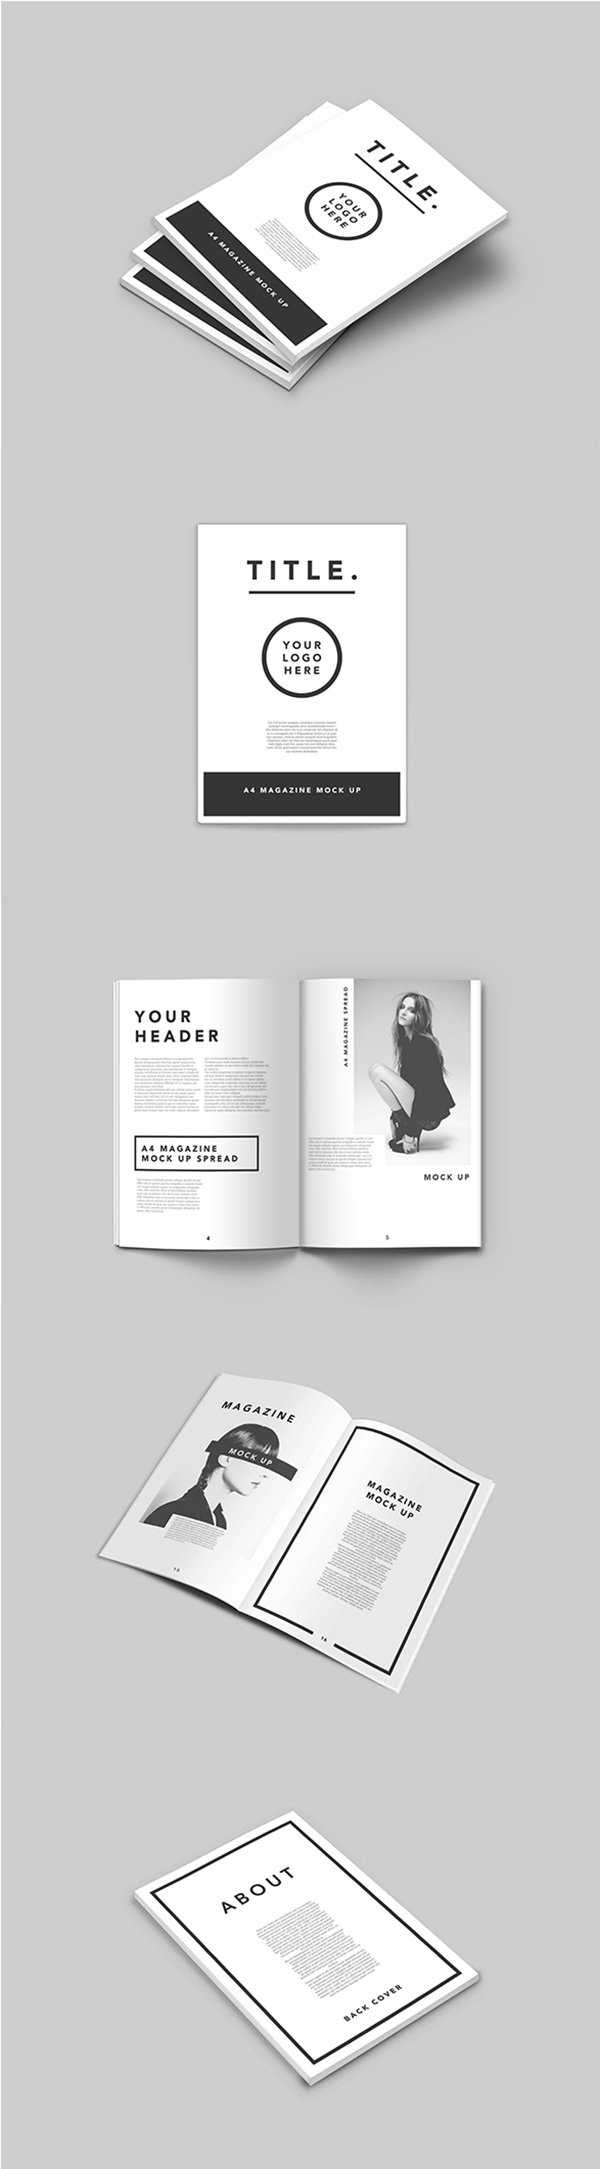 75+ Free Psd Magazine, Book, Cover & Brochure Mock Ups Within Blank Magazine Template Psd